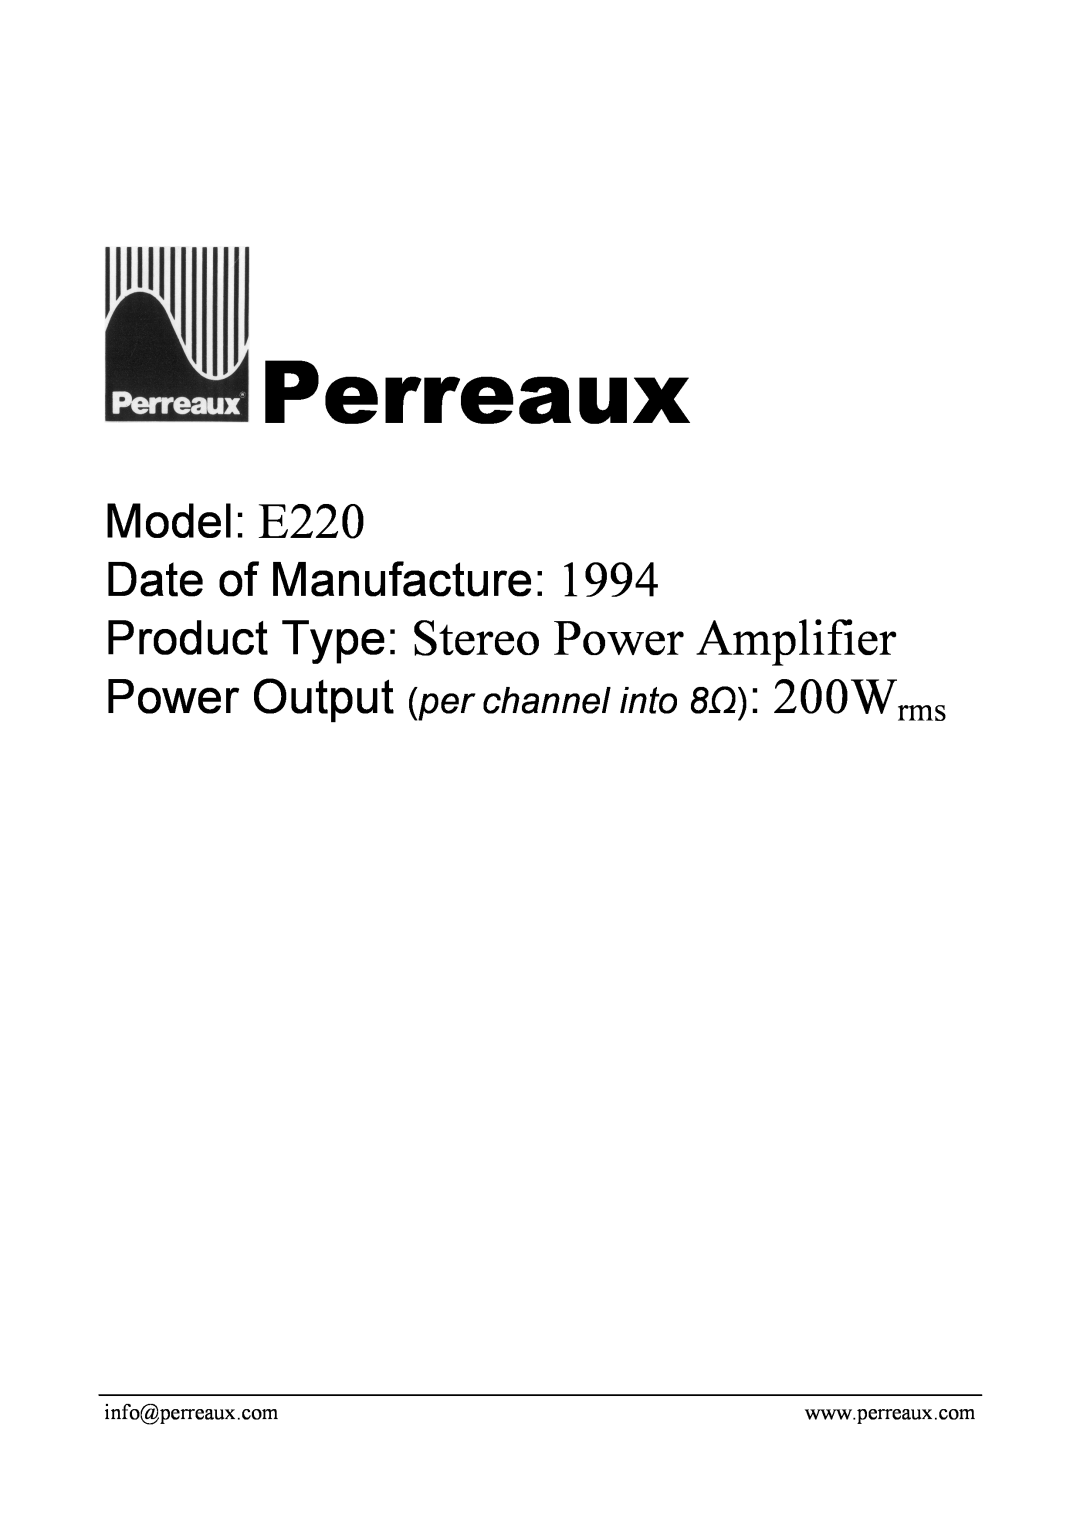 Perreaux manual Perreaux, Product Type Stereo Power Amplifier, Model E220 Date of Manufacture 